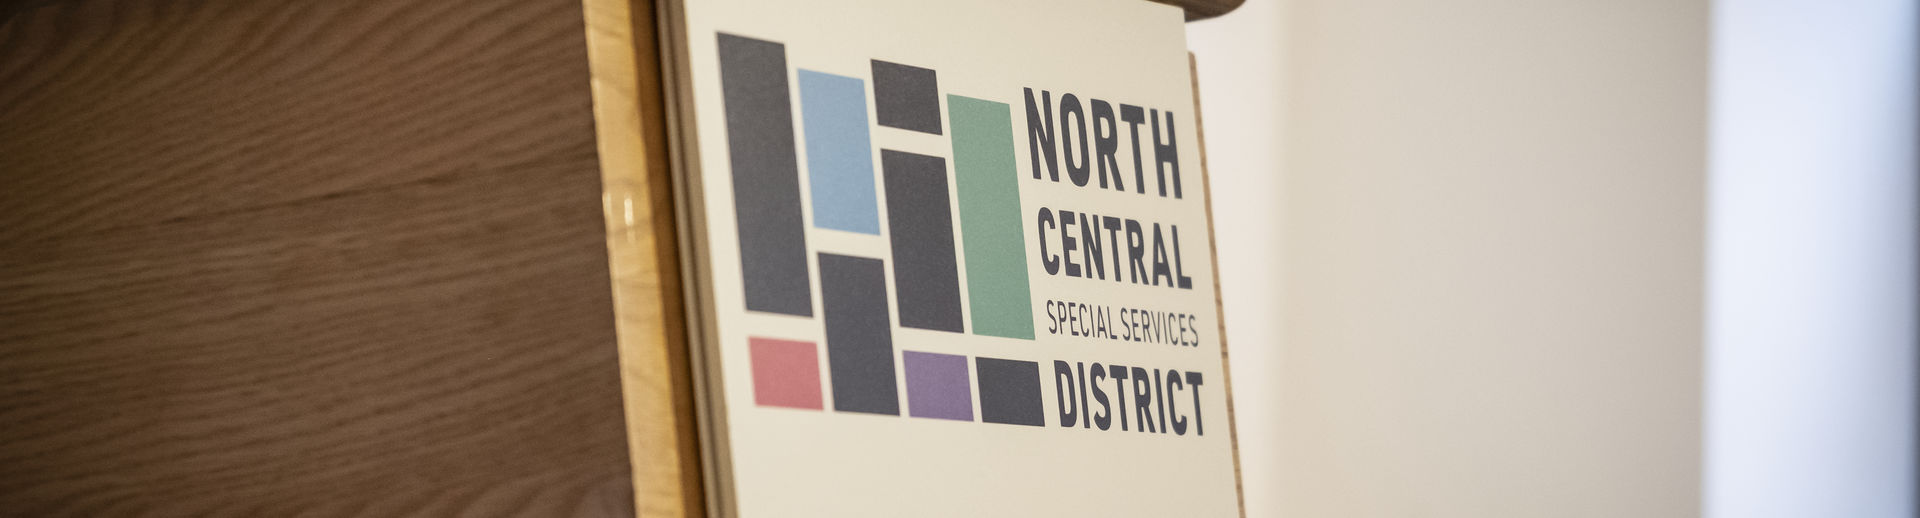 The North Central Special Services District signage on the front of a podium.